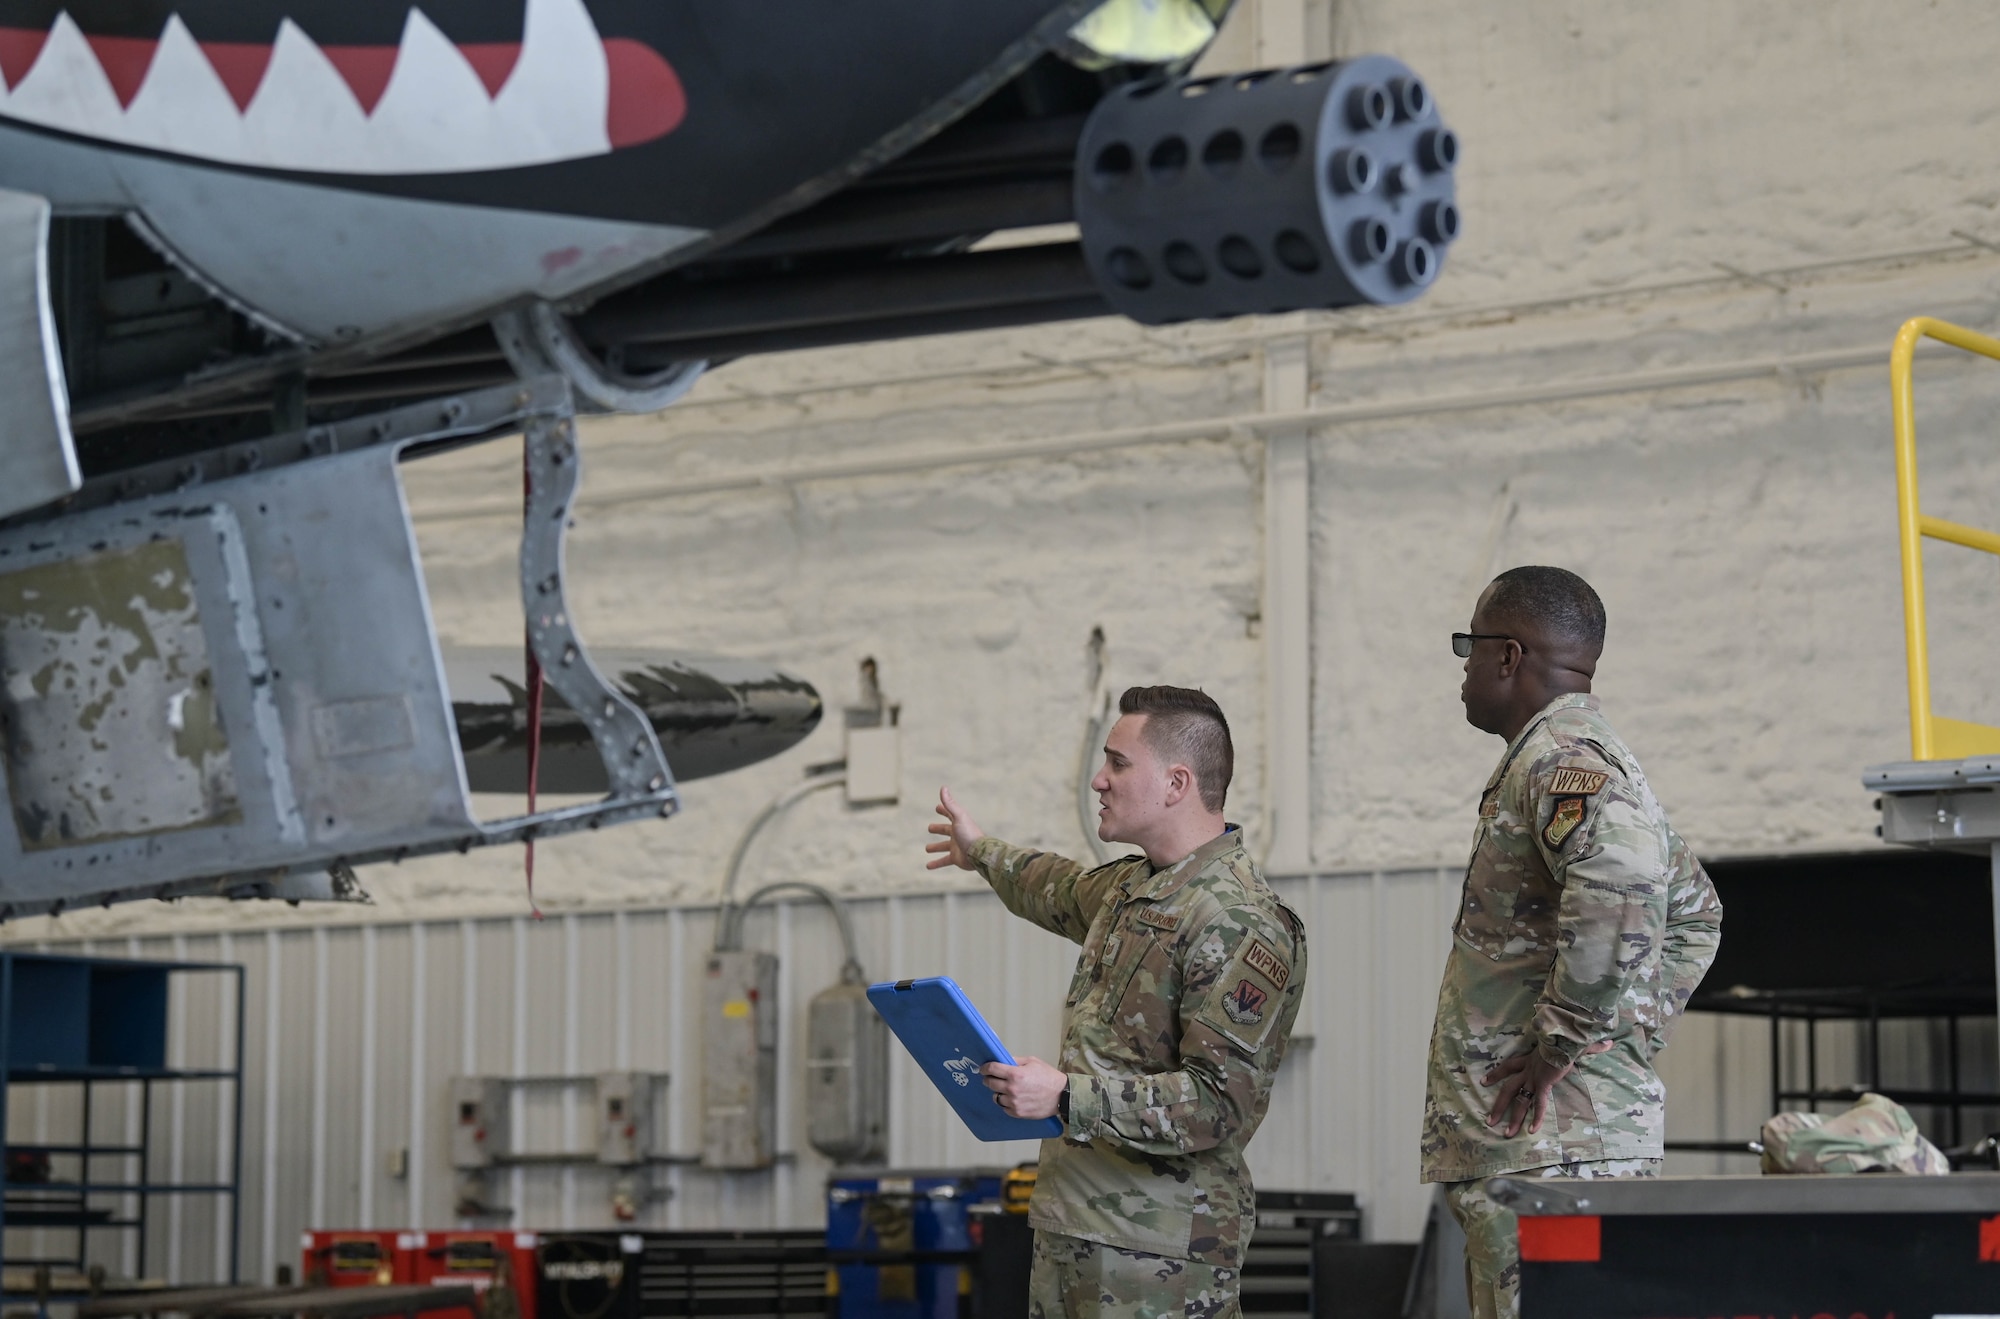 U.S. Air Force Tech. Sgt. Anthony Padilla Negron, 74th Fighter Generation Squadron weapons specialist, left, briefs Maj. Gen. Stacey Hawkins, Air Combat Command director of logistics, engineering and force protection, right, about the A-10C Thunderbolt II aircraft and the weapons system March 25, 2022, at Moody Air Force Base, Georgia. Hawkins visited the base as part of a familiarization tour and to see Moody’s role as an ACC Lead Wing. (U.S. Air Force photo by Senior Airman Rebeckah Medeiros)